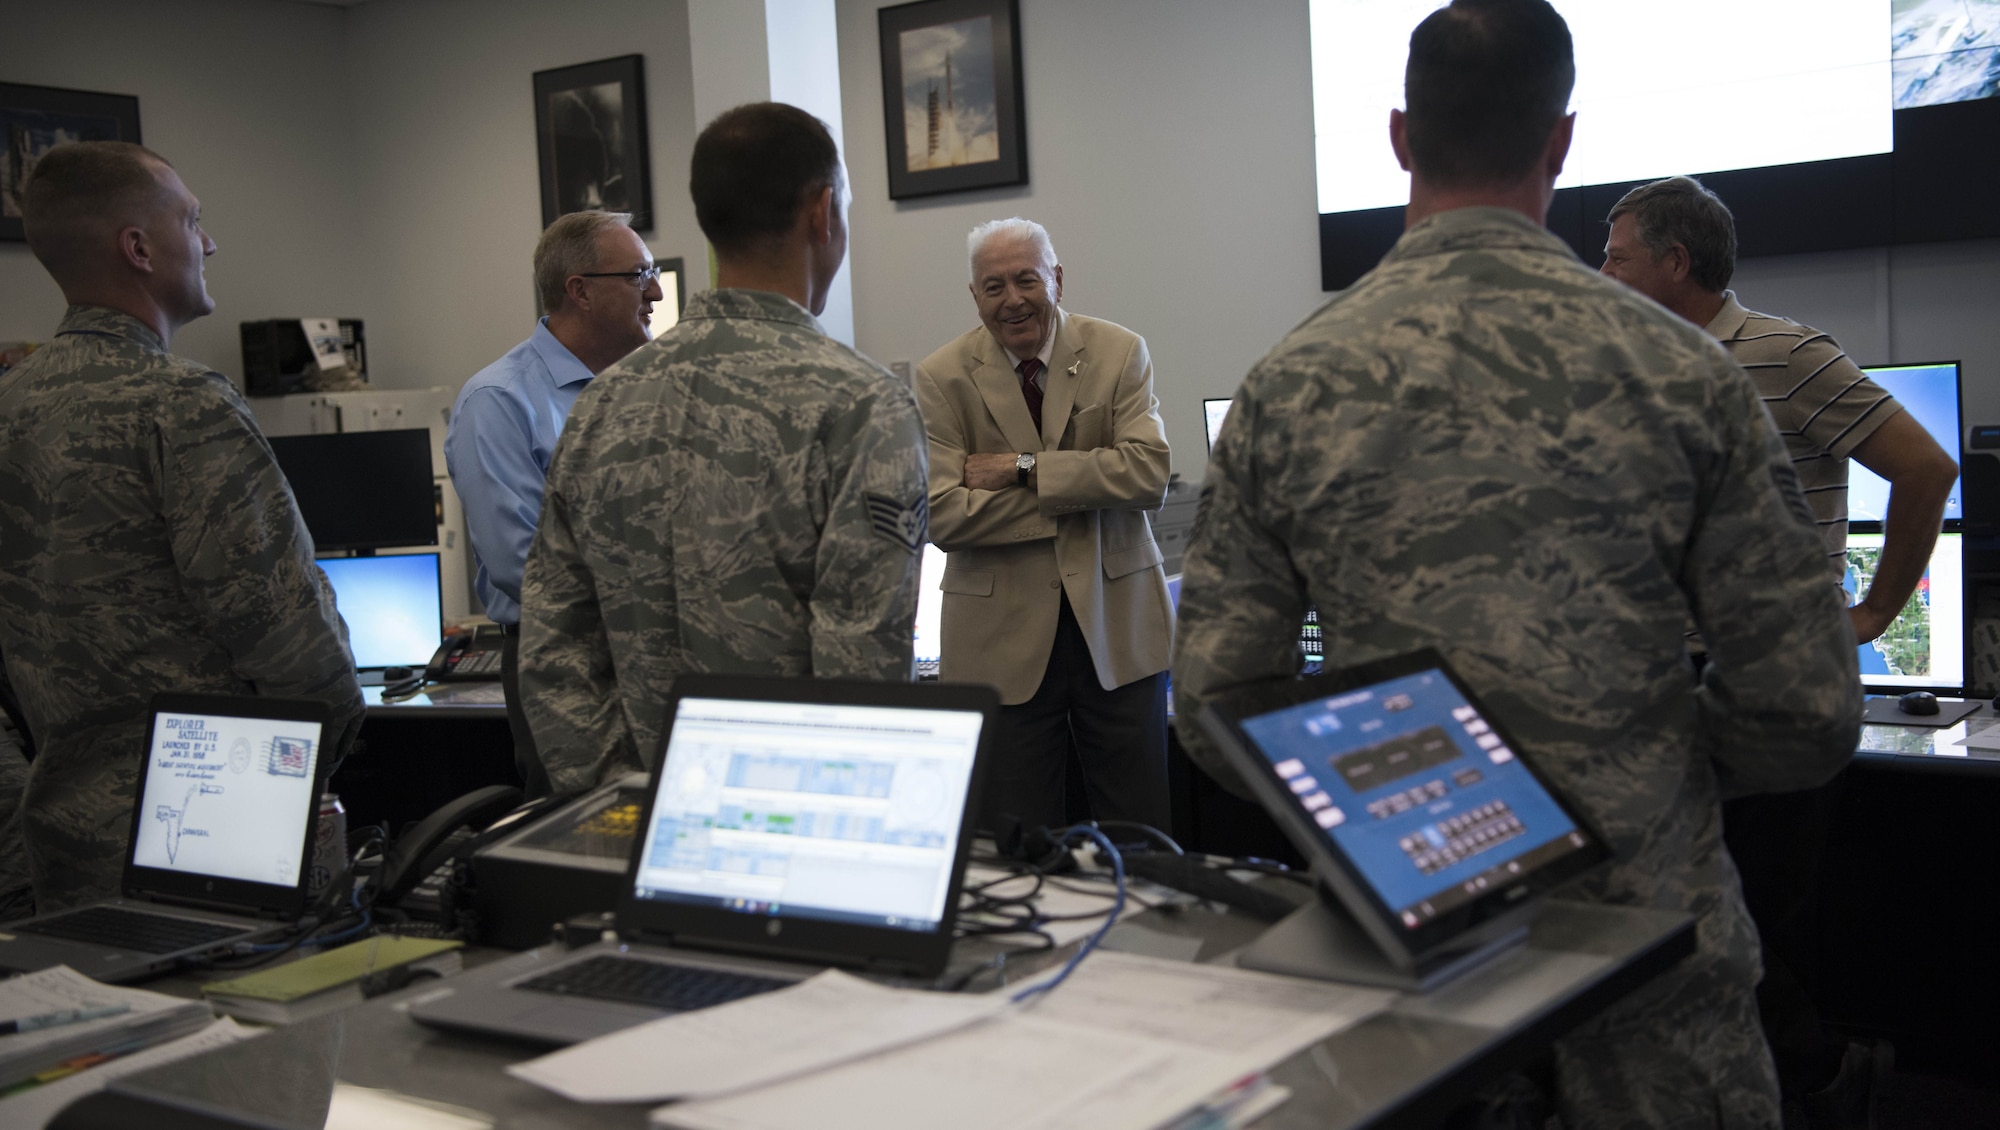 Dr. John Meisenheimer speaks to members of the 45th Weather Squadron prior to the GovSat-1 launch, Jan. 31, 2018 at Cape Canaveral Air Force Station, Fla. (U.S. Air Force photo by Airman Zoe Thacker)